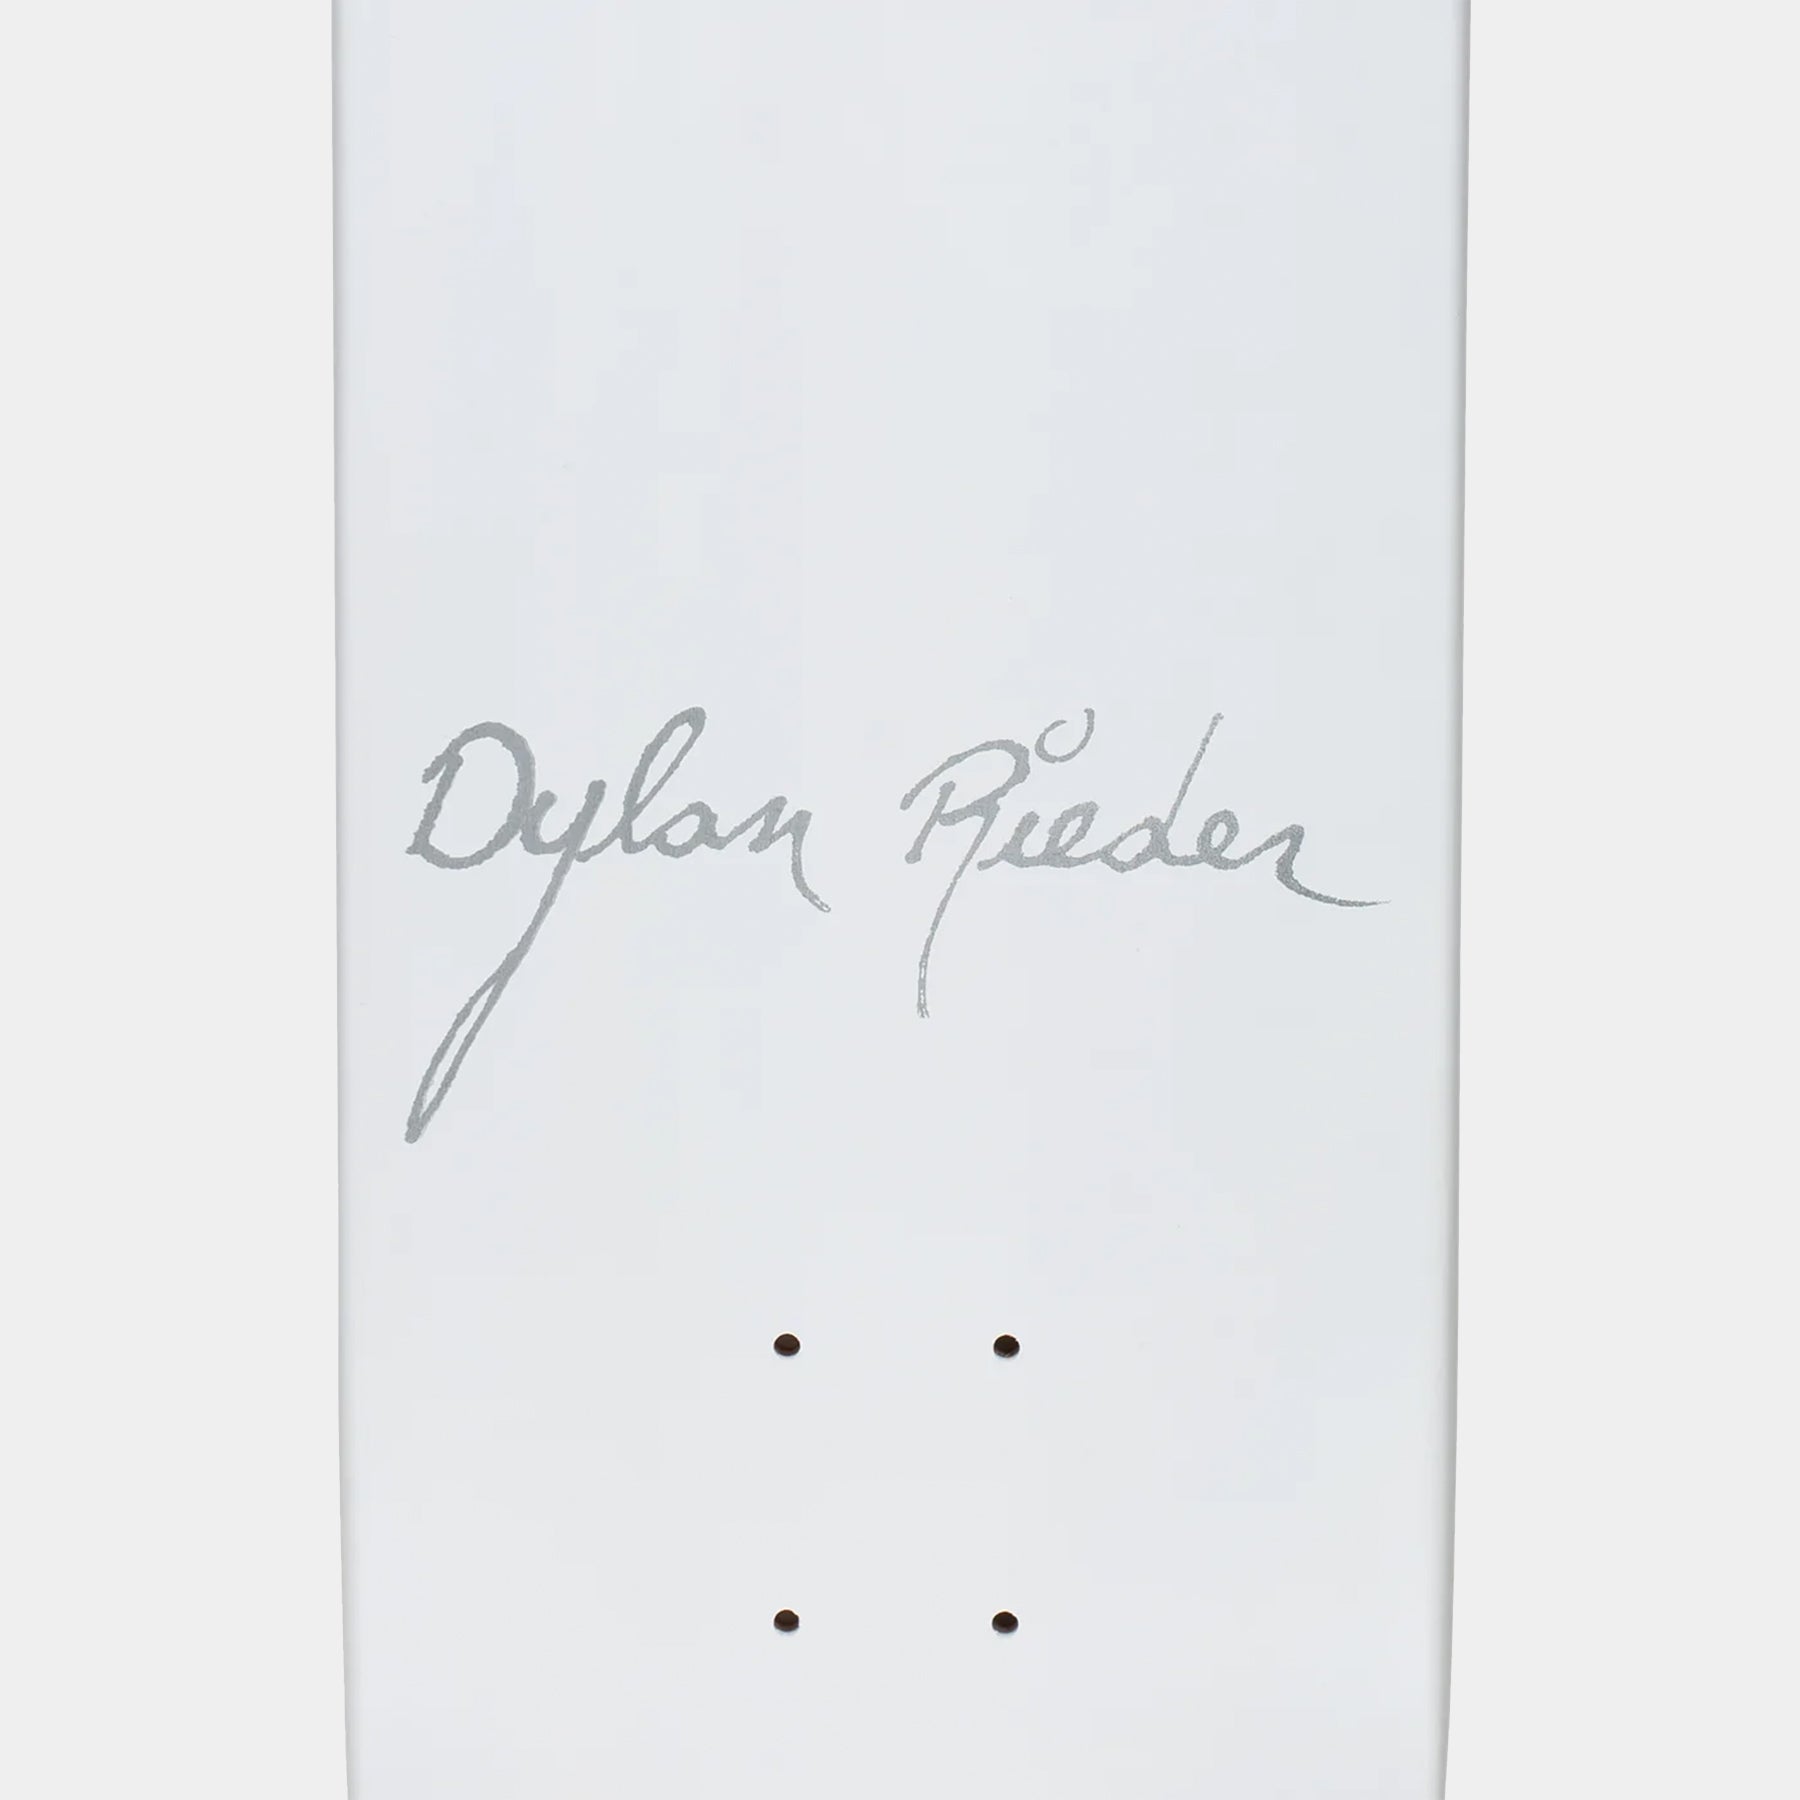 Fucking Awesome Board - White Dipped Dylan